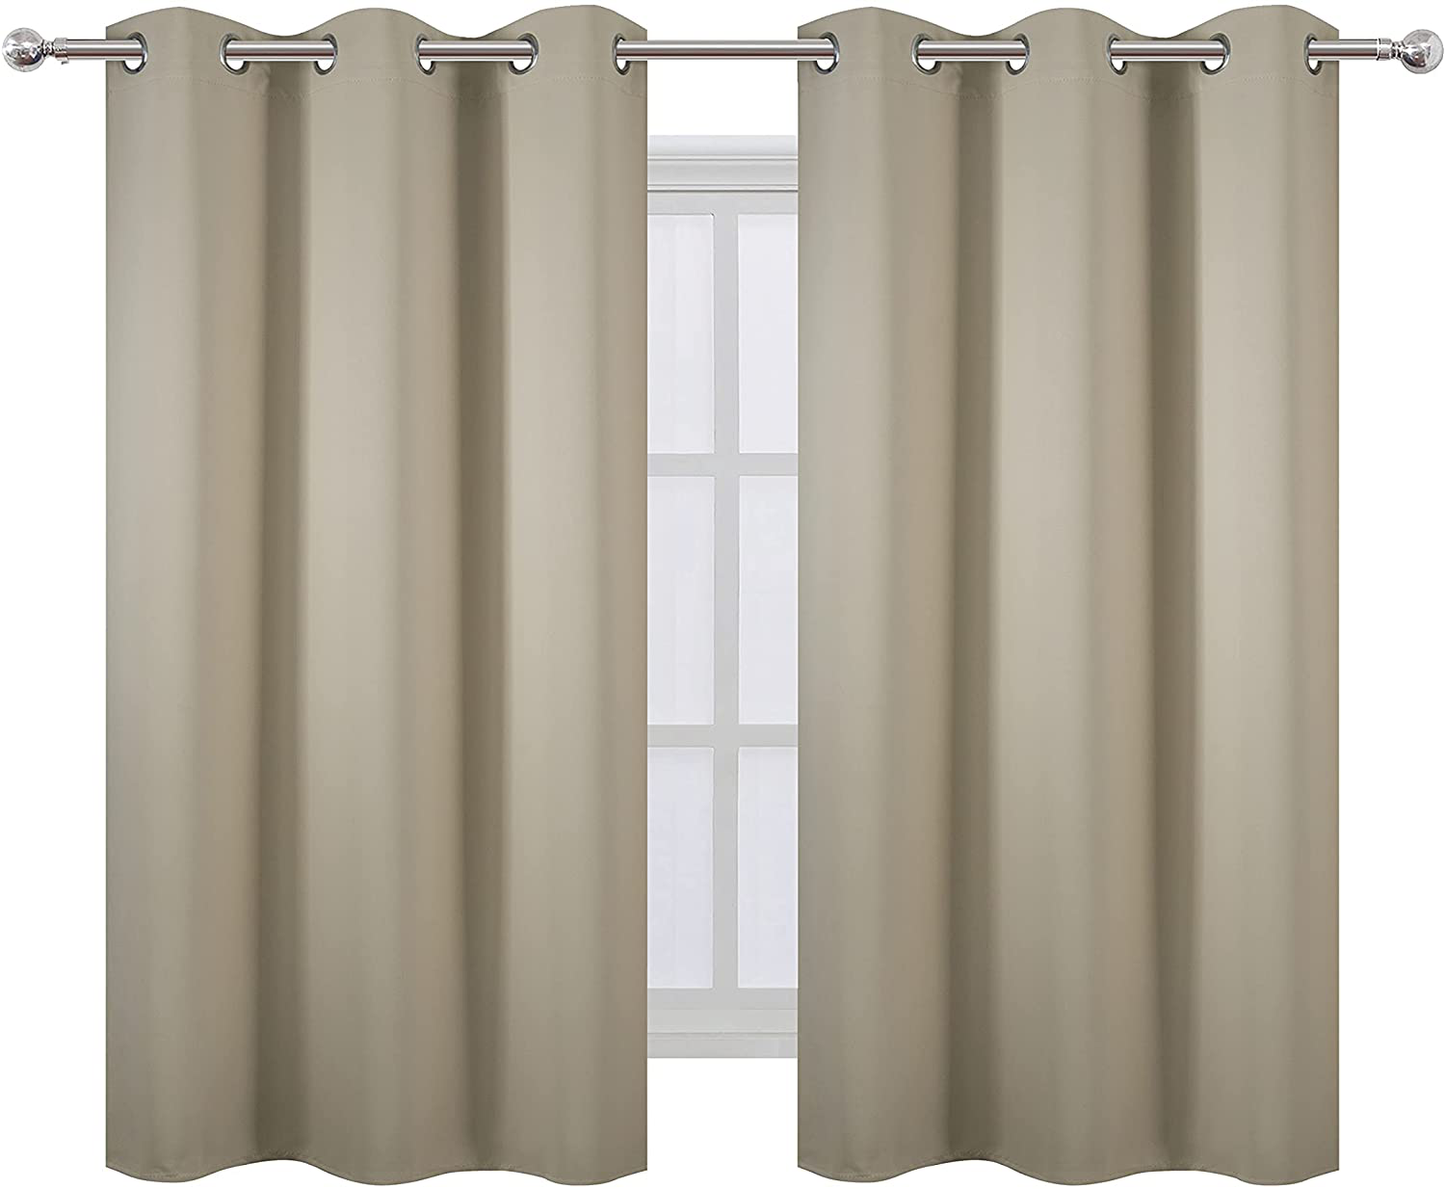 LEMOMO Teal Thermal Blackout Curtains/38 x 84 Inch/Set of 2 Panels Room Darkening Curtains for Bedroom